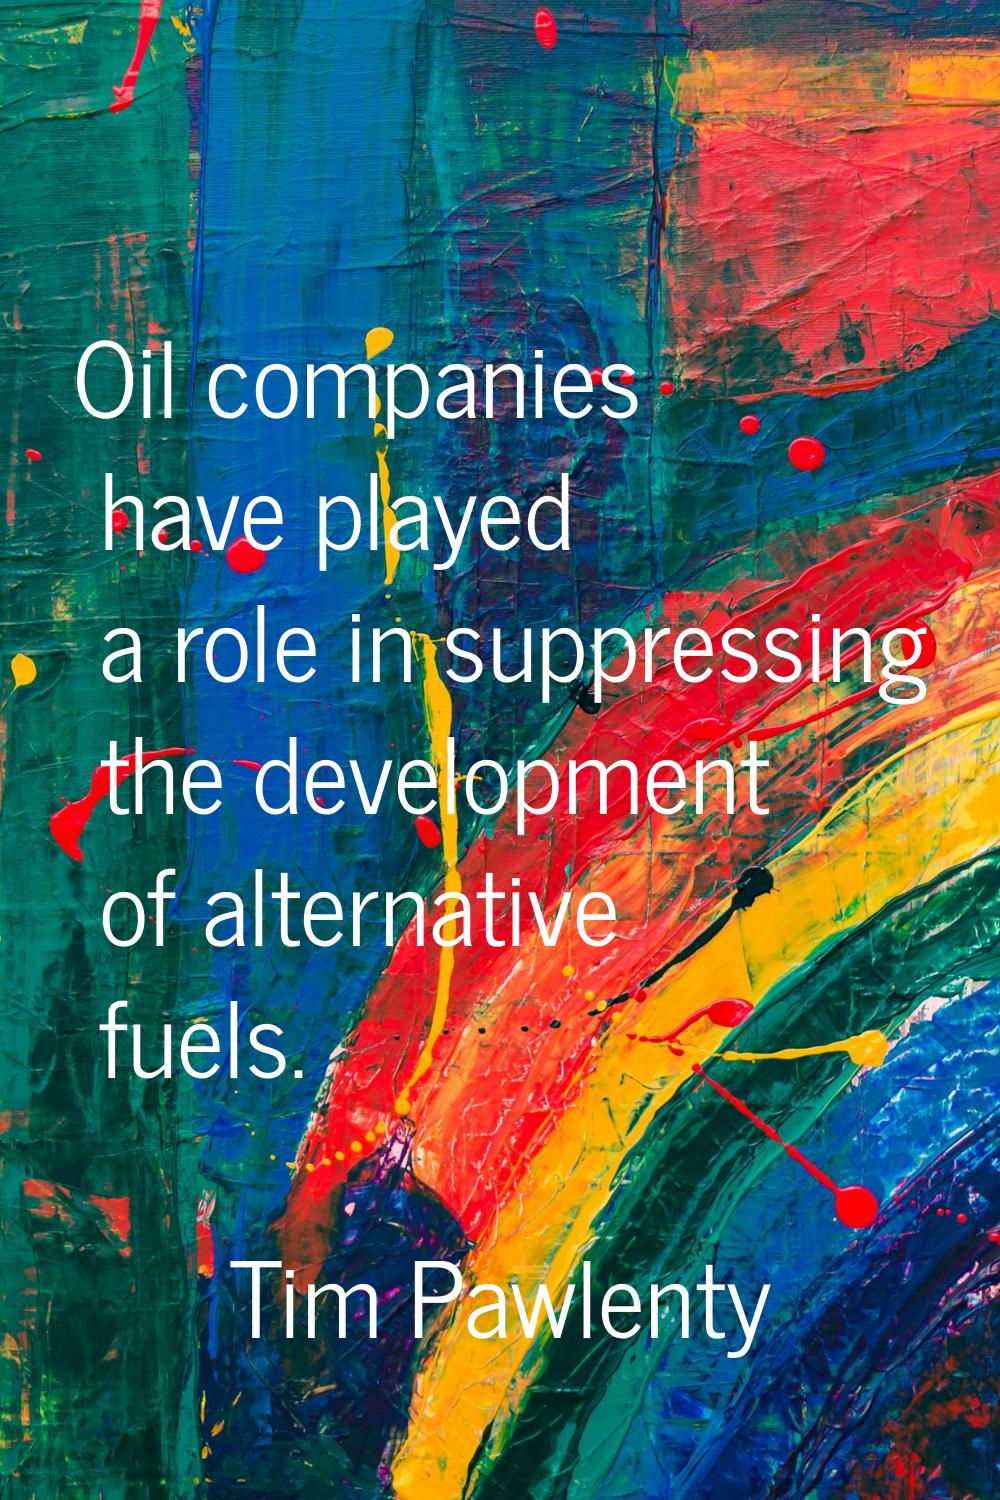 Oil companies have played a role in suppressing the development of alternative fuels.